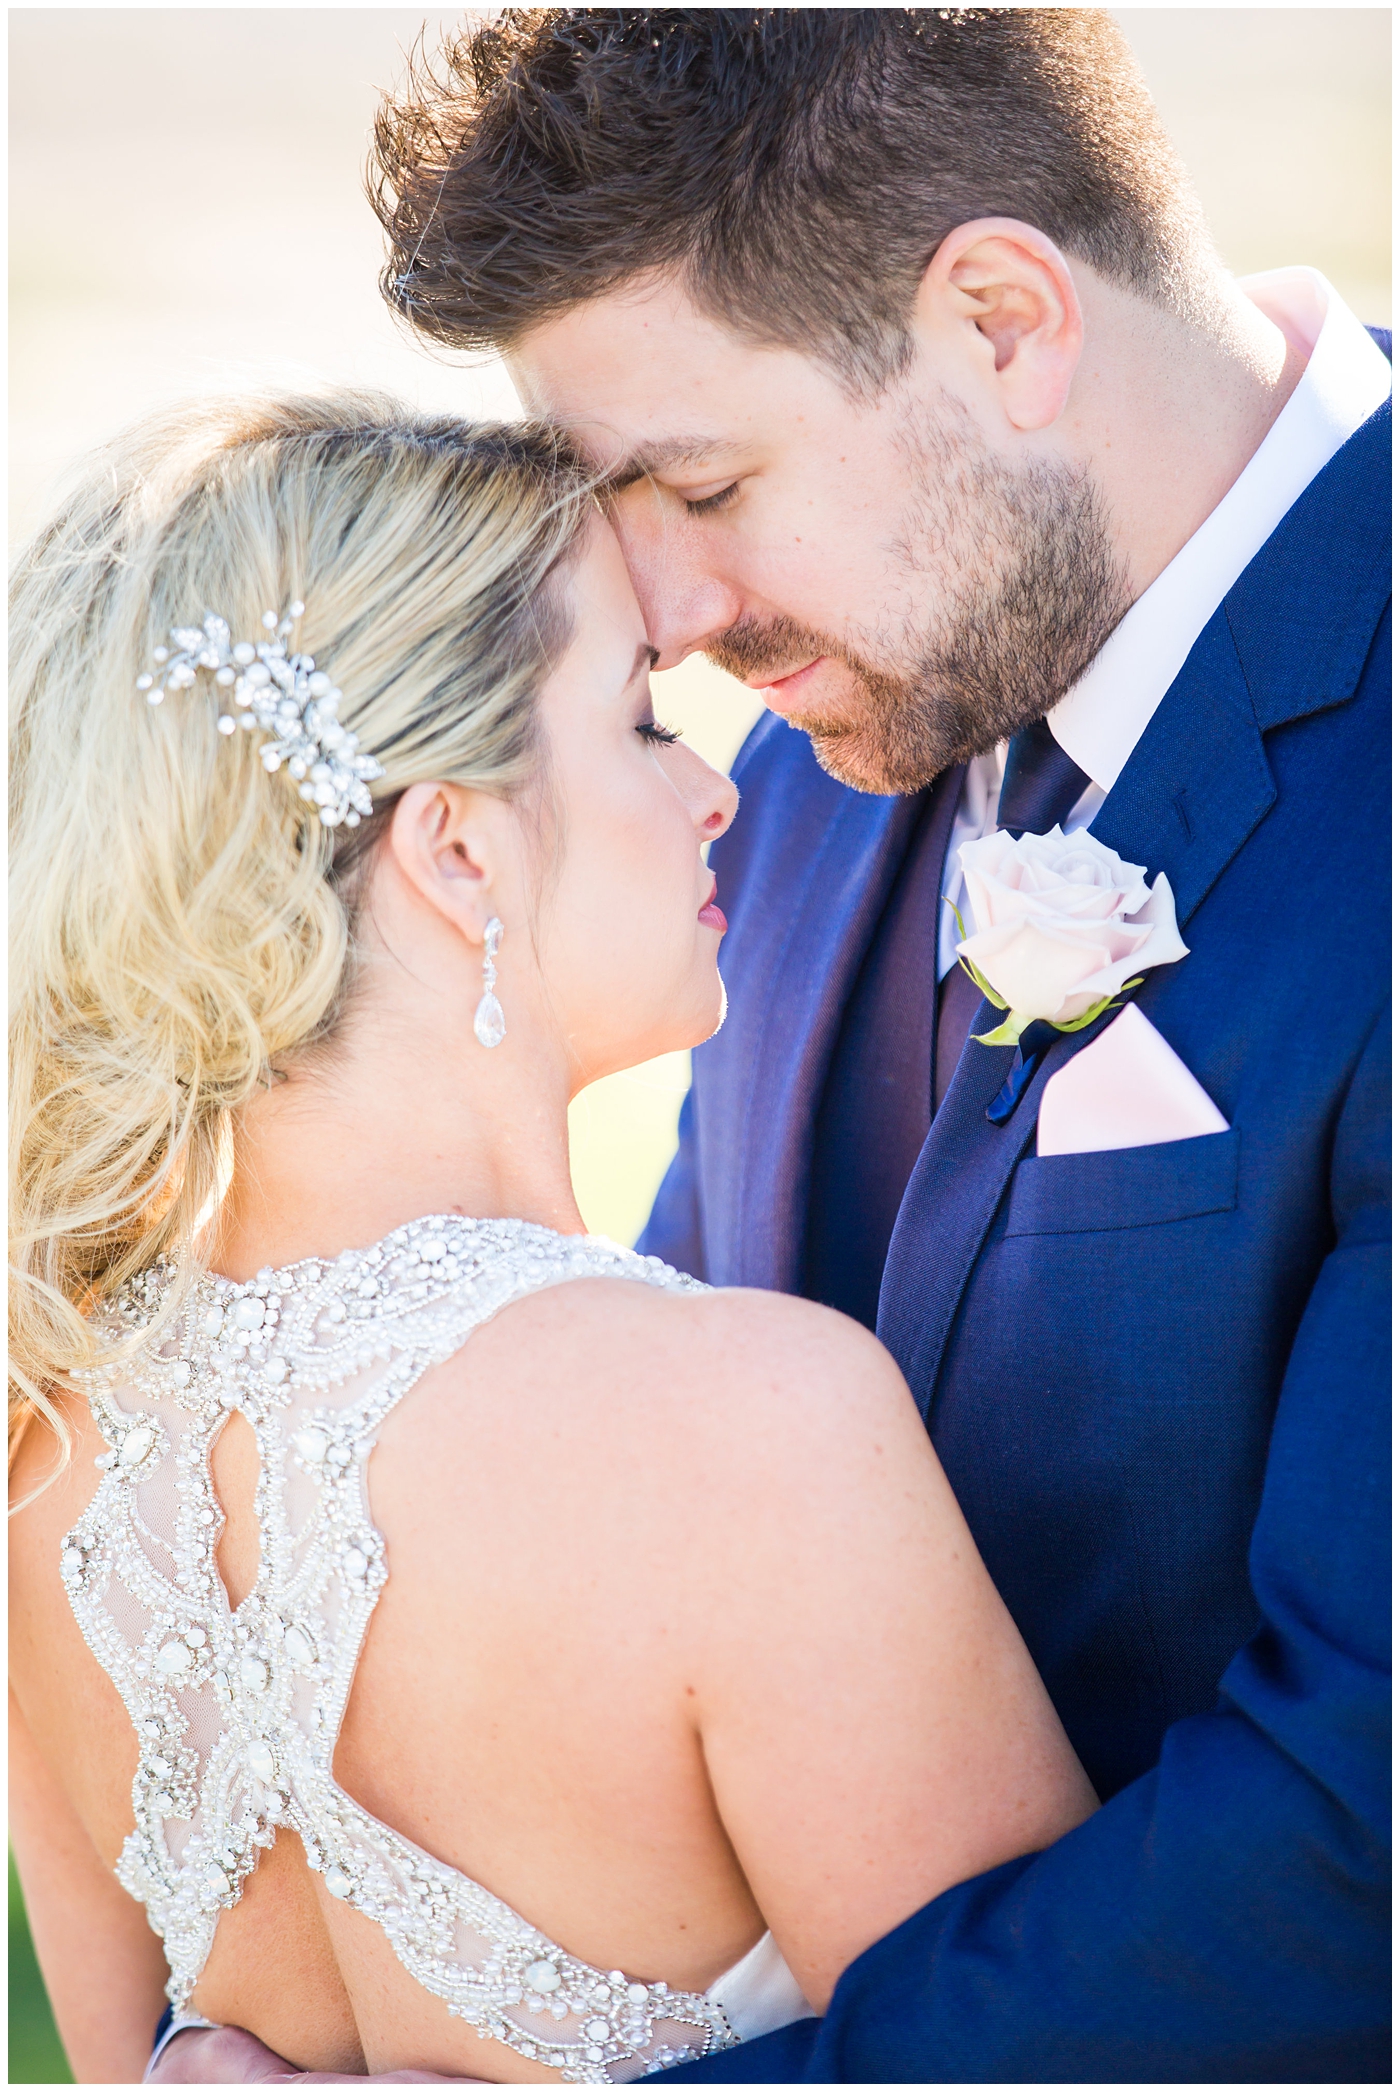 gorgeous bride with side swept hair in racerback pronovias dress and blush pink, white rose and eucalyptus greenery wedding bouquet with groom in navy suit and tie couple portrait on wedding day